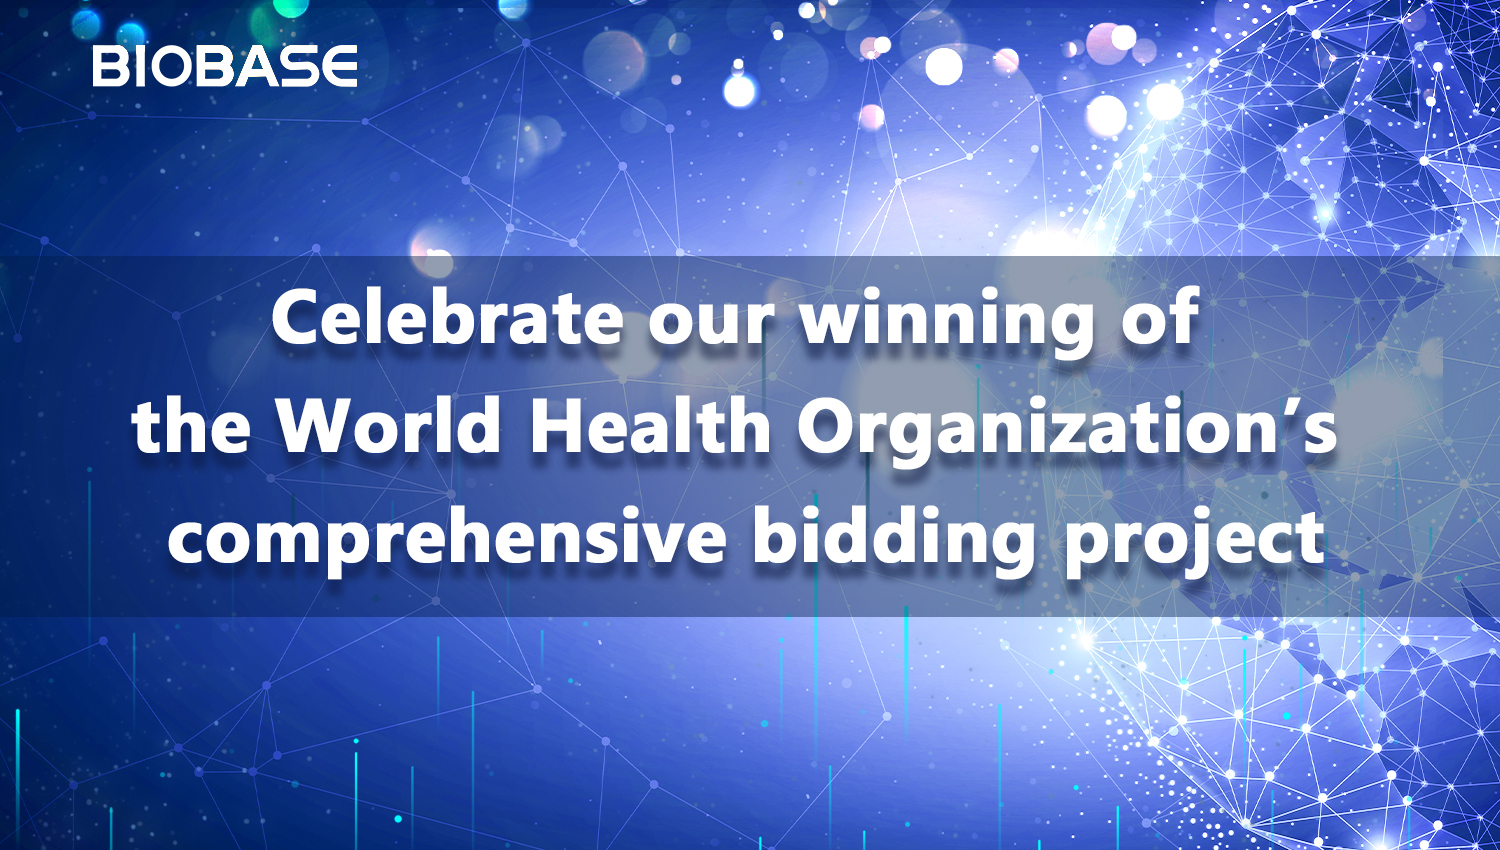 Celebrate our winning of the World Health Organization’s comprehensive bidding project